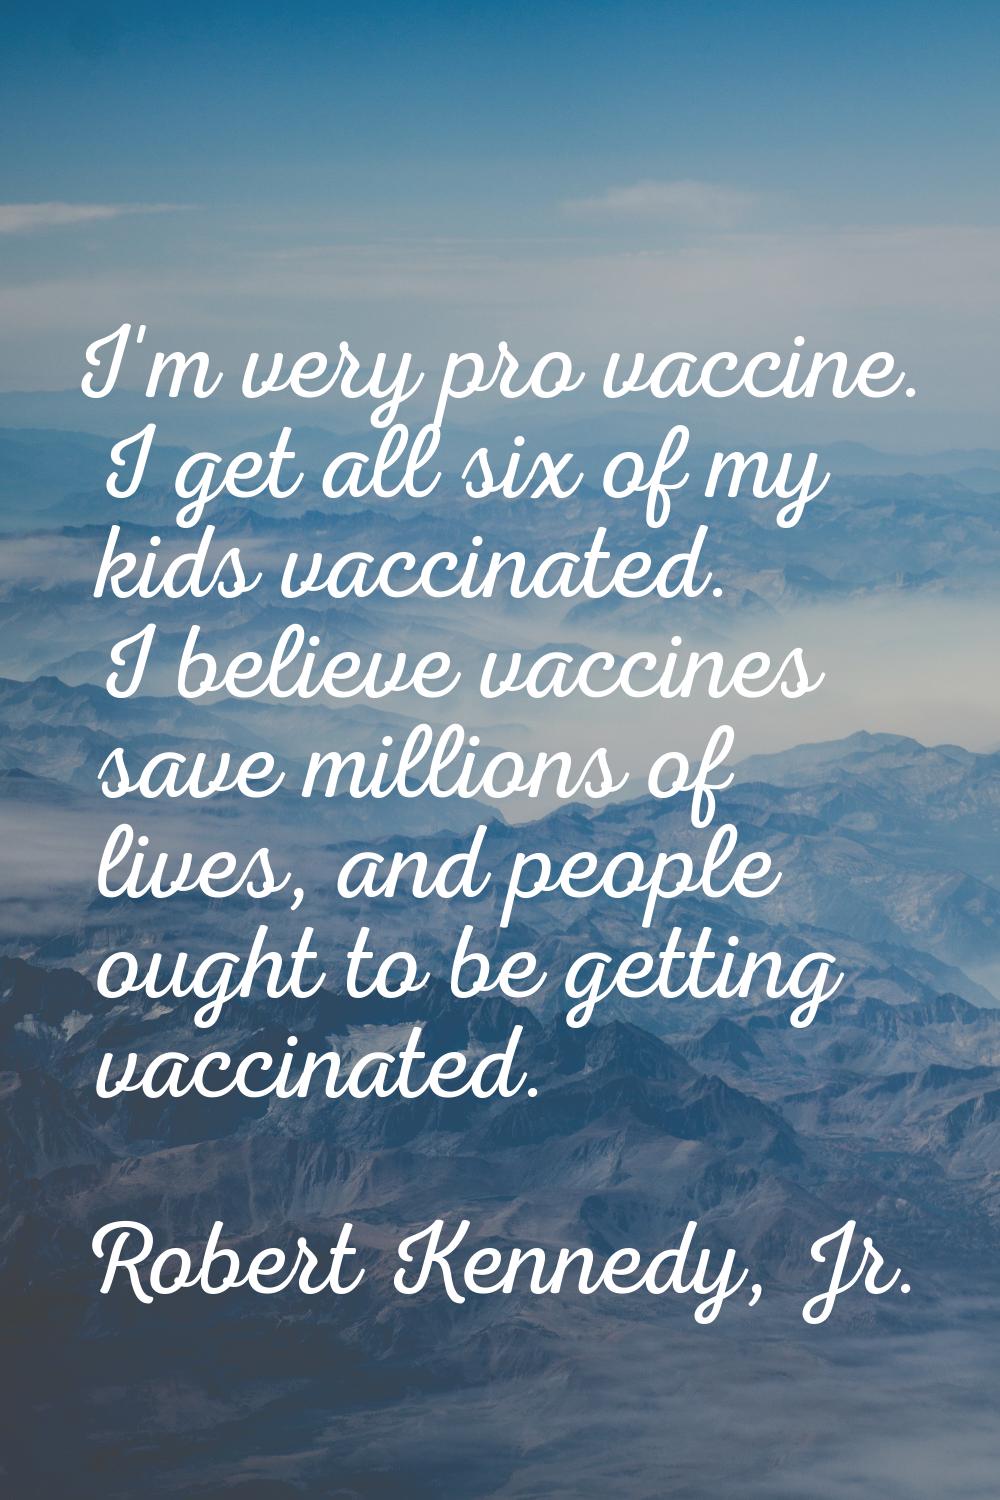 I'm very pro vaccine. I get all six of my kids vaccinated. I believe vaccines save millions of live